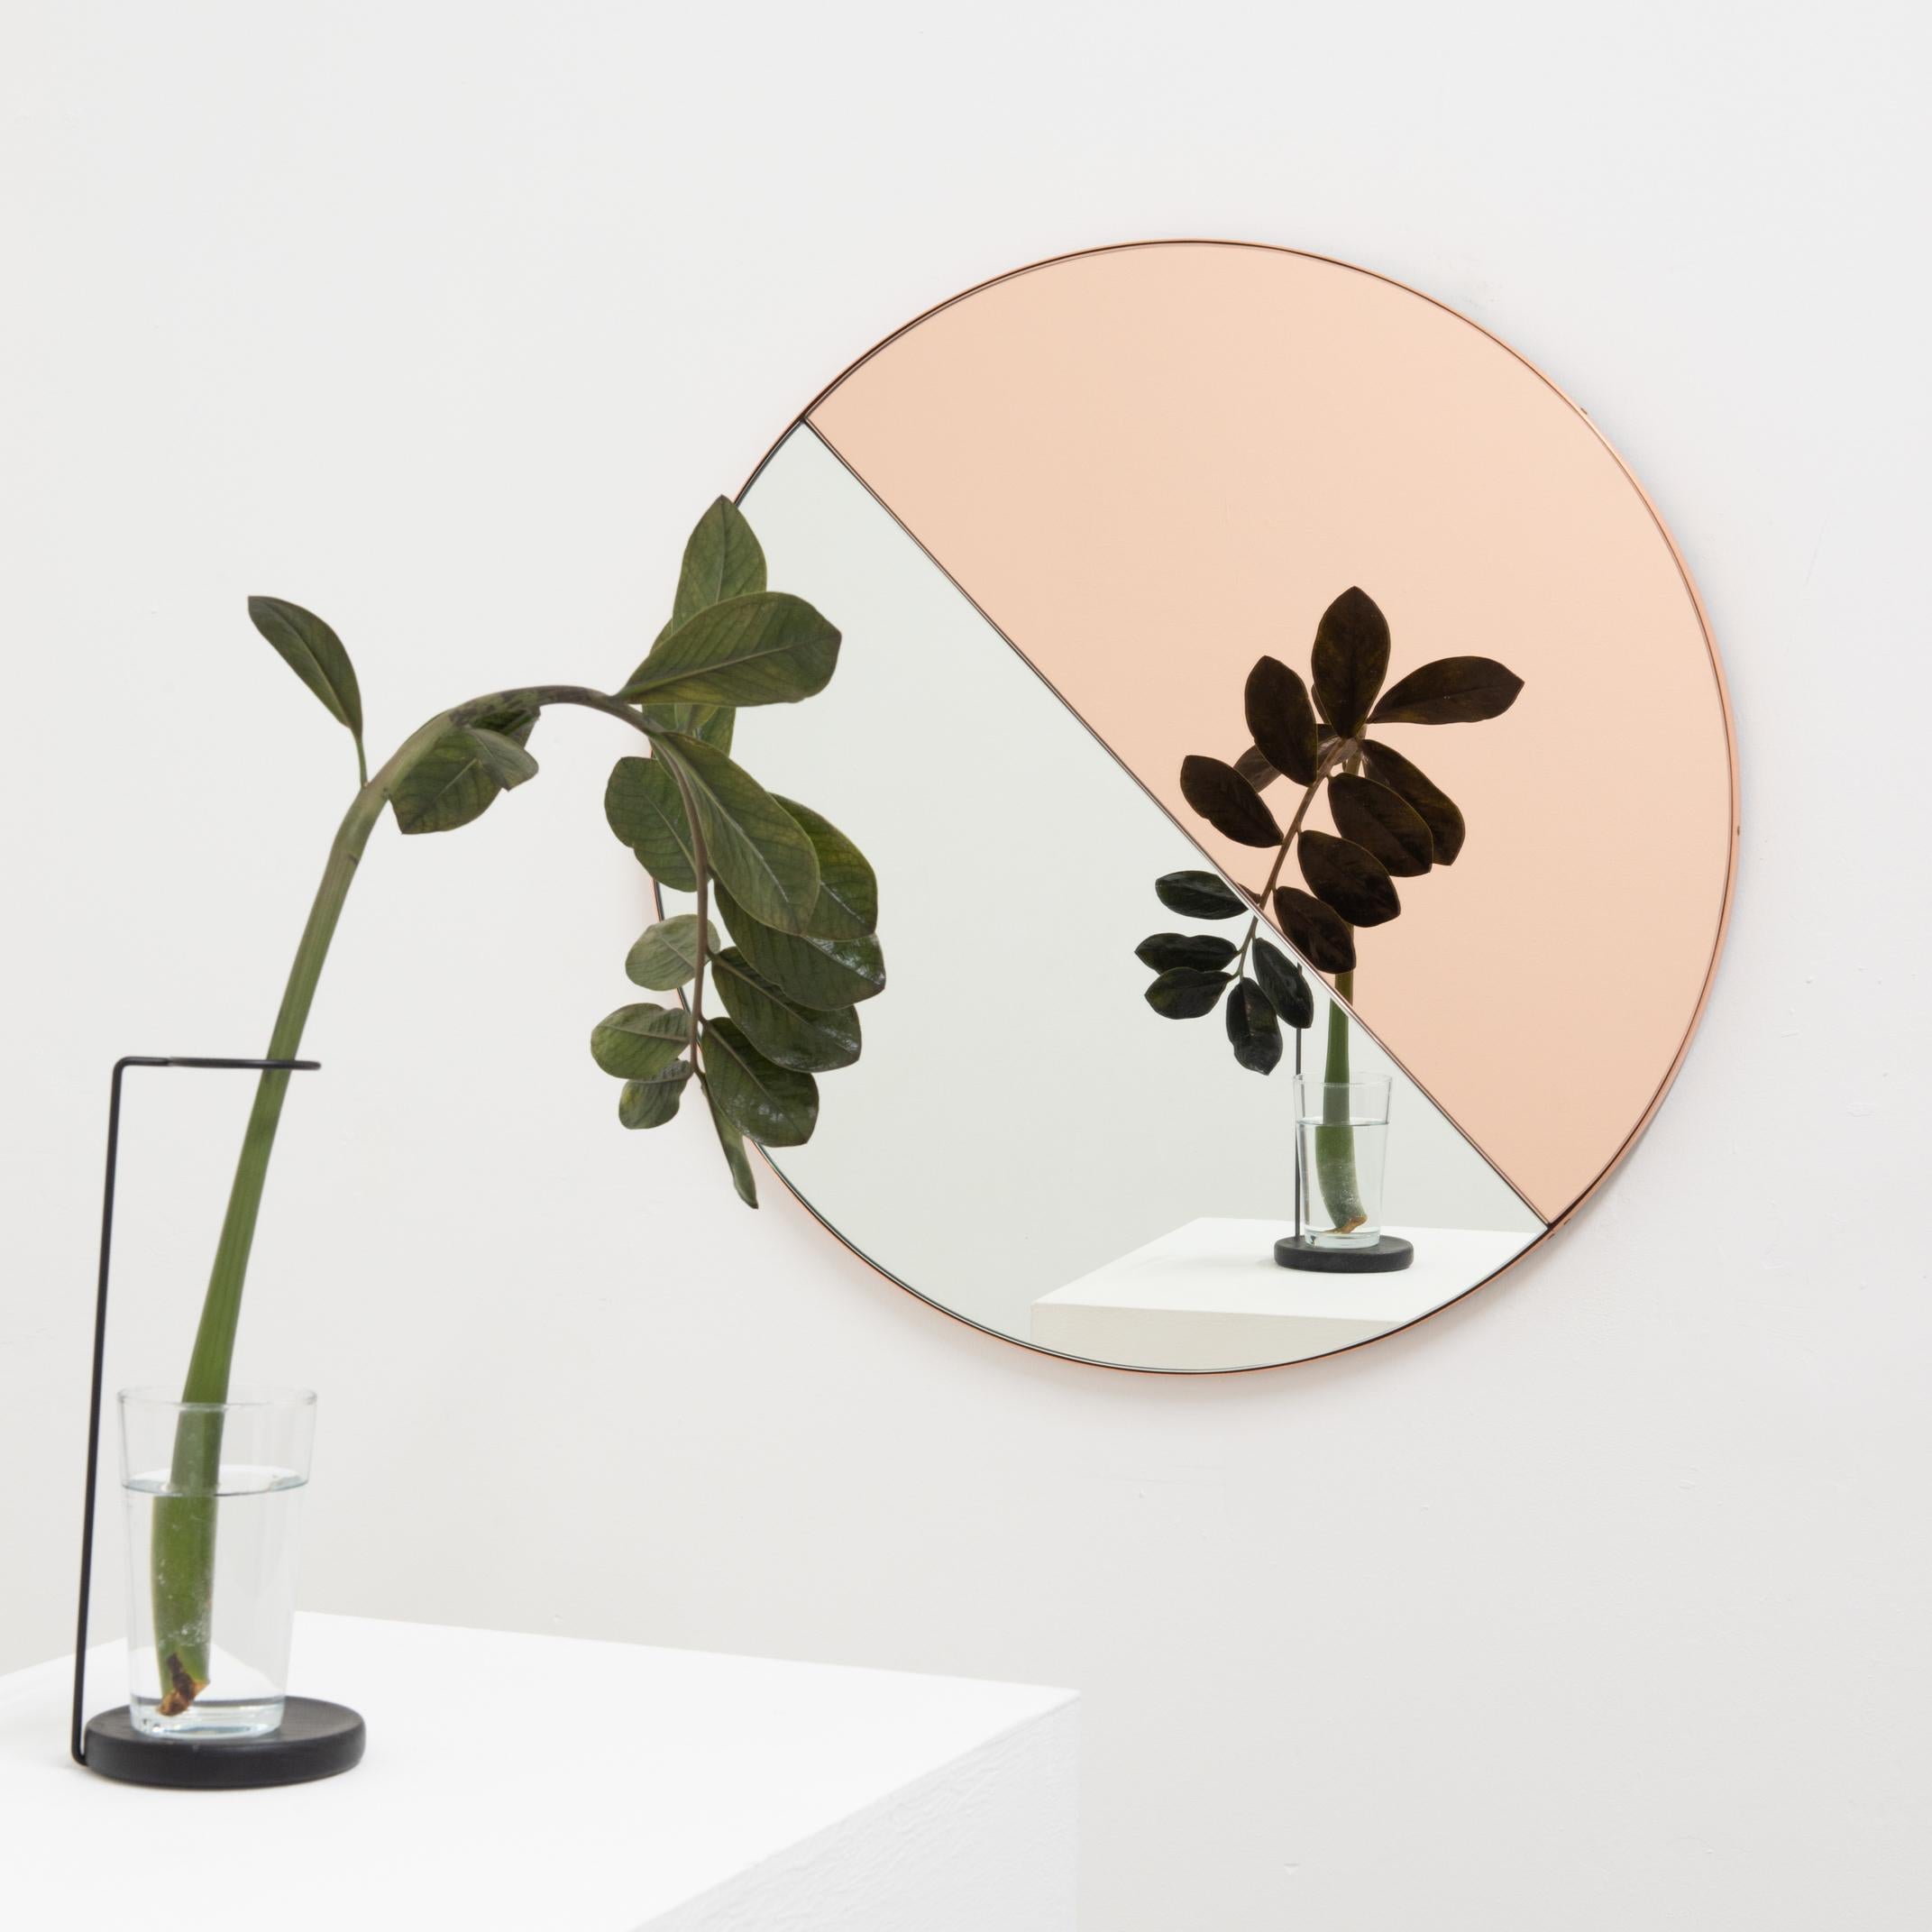 Contemporary mixed tinted (silver & rose gold / peach) Orbis Dualis mirror with a chic copper frame. Designed and handcrafted in London, UK.

Supplied fully fitted with a specialist hanging system that allows the mirror to be hung in four